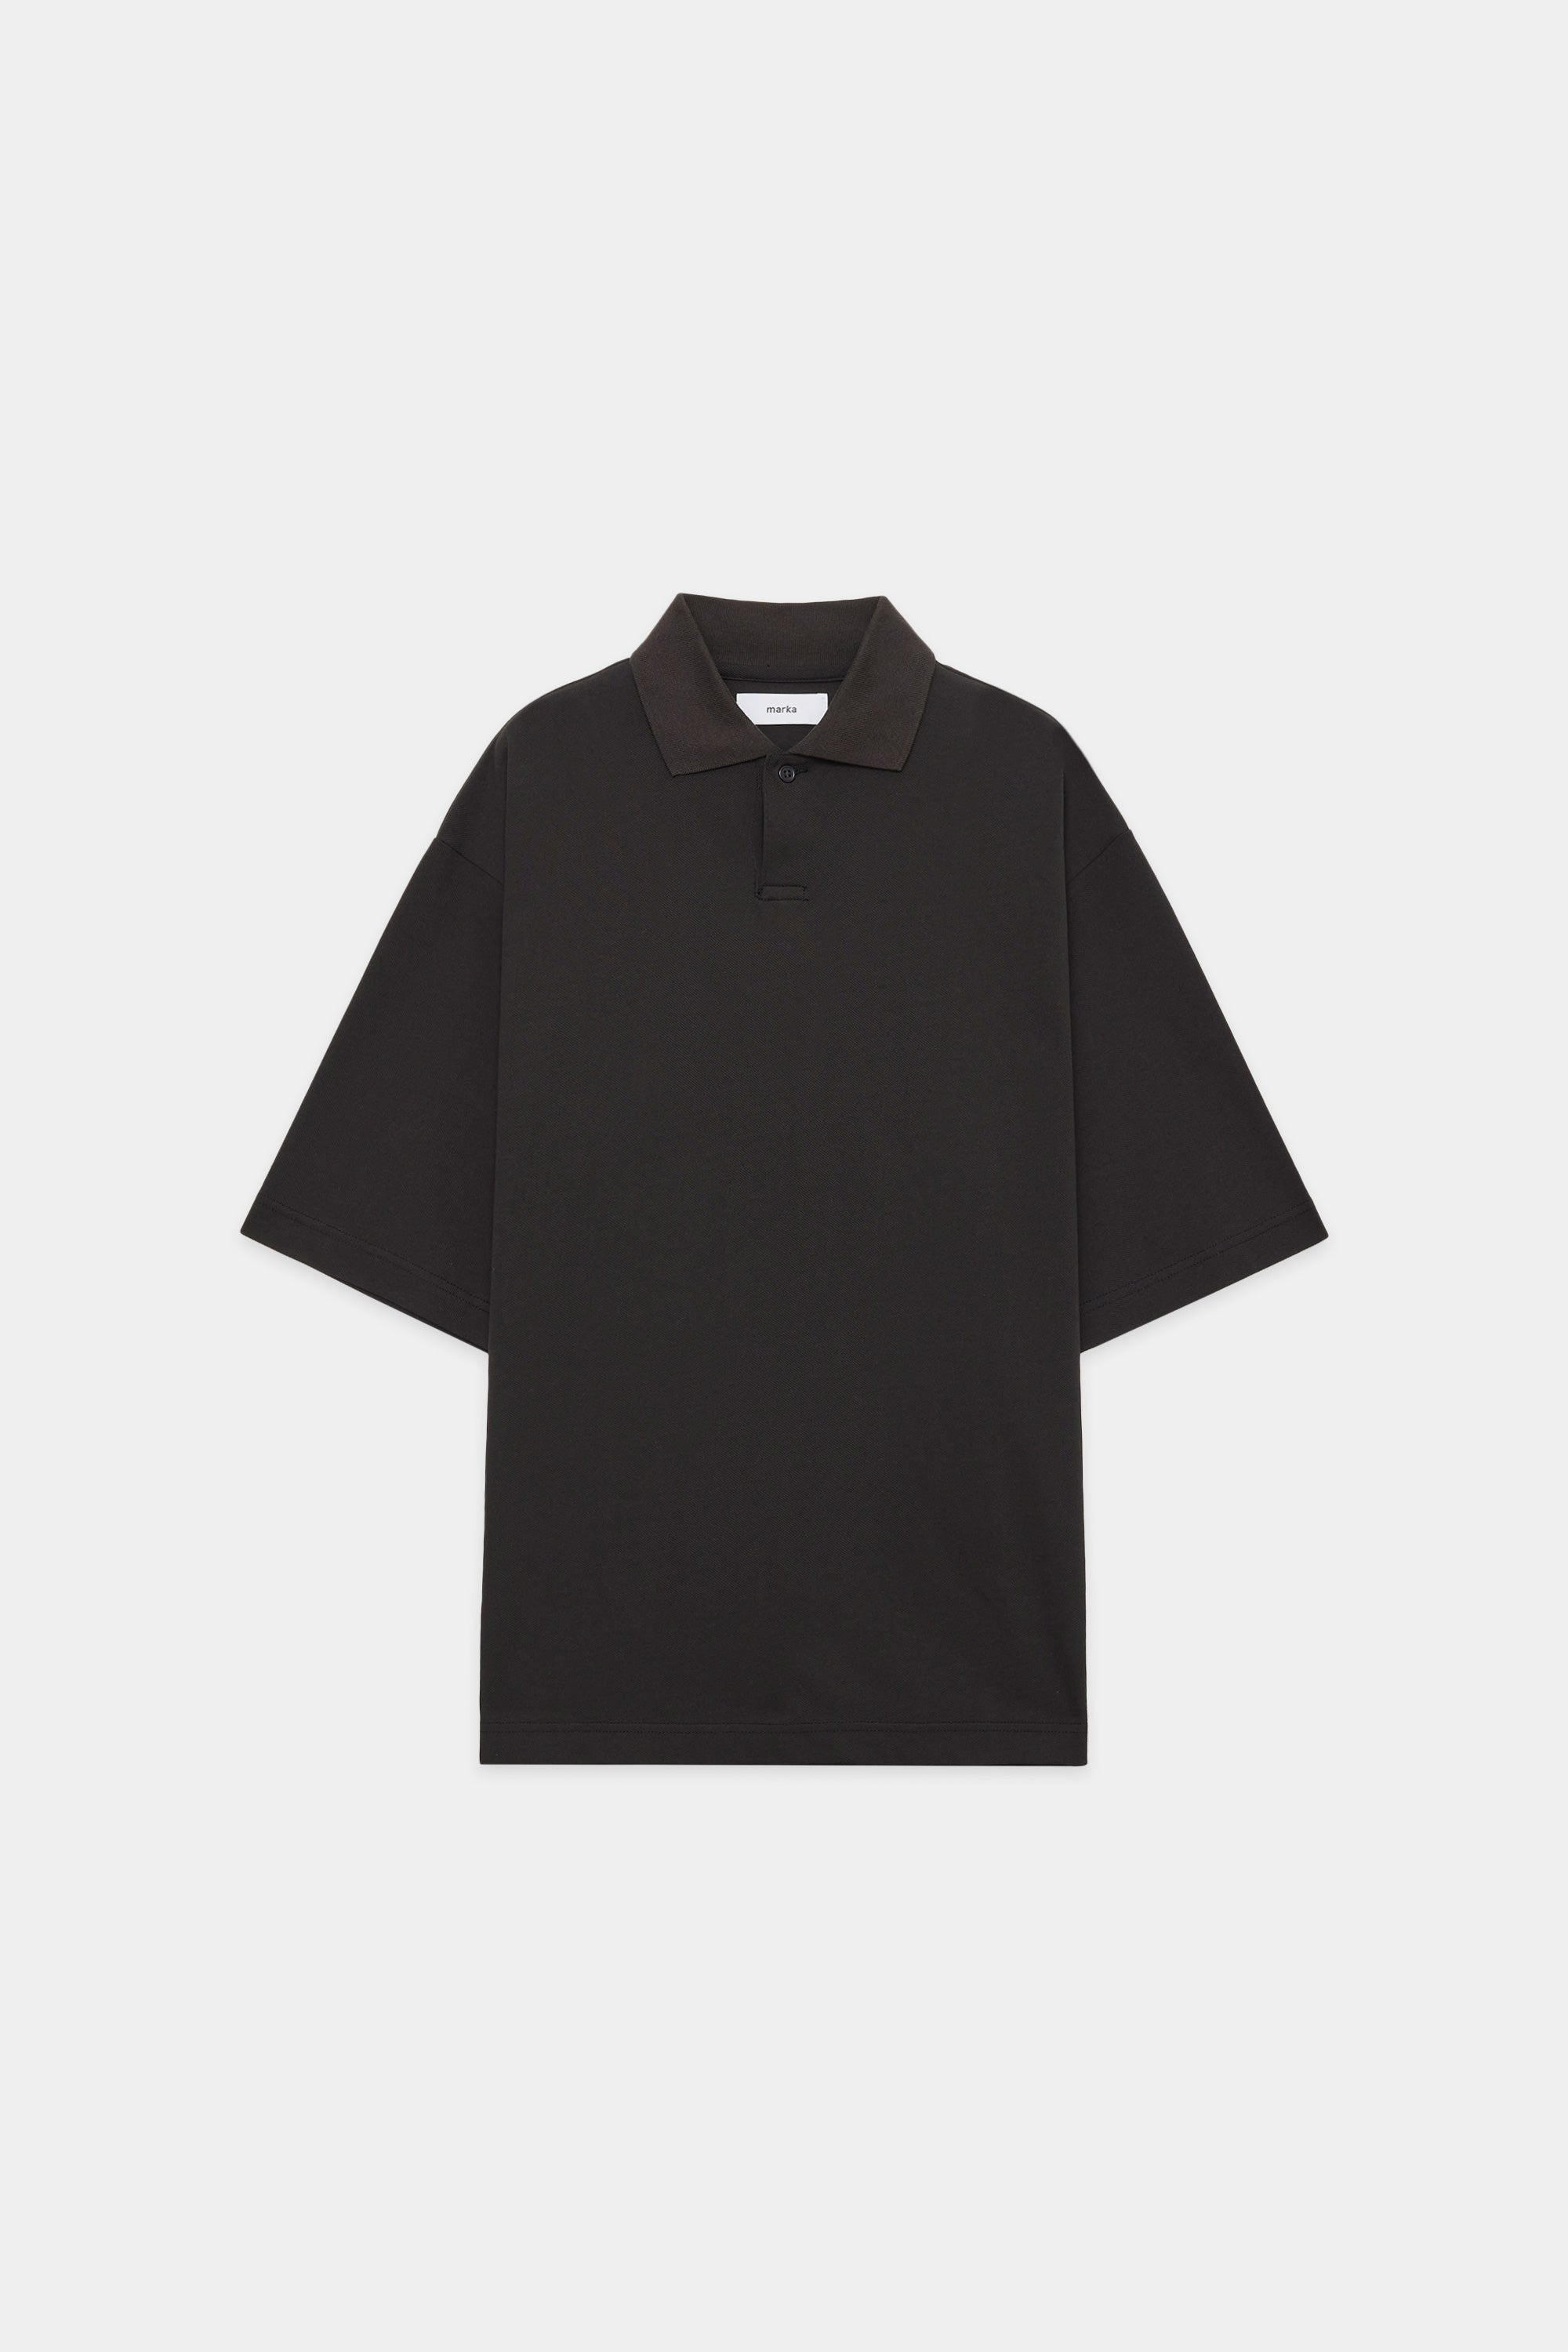 40//1 ORGANIC COTTON HIGH TWISTED PIQUE 1B POLO, Charcoal